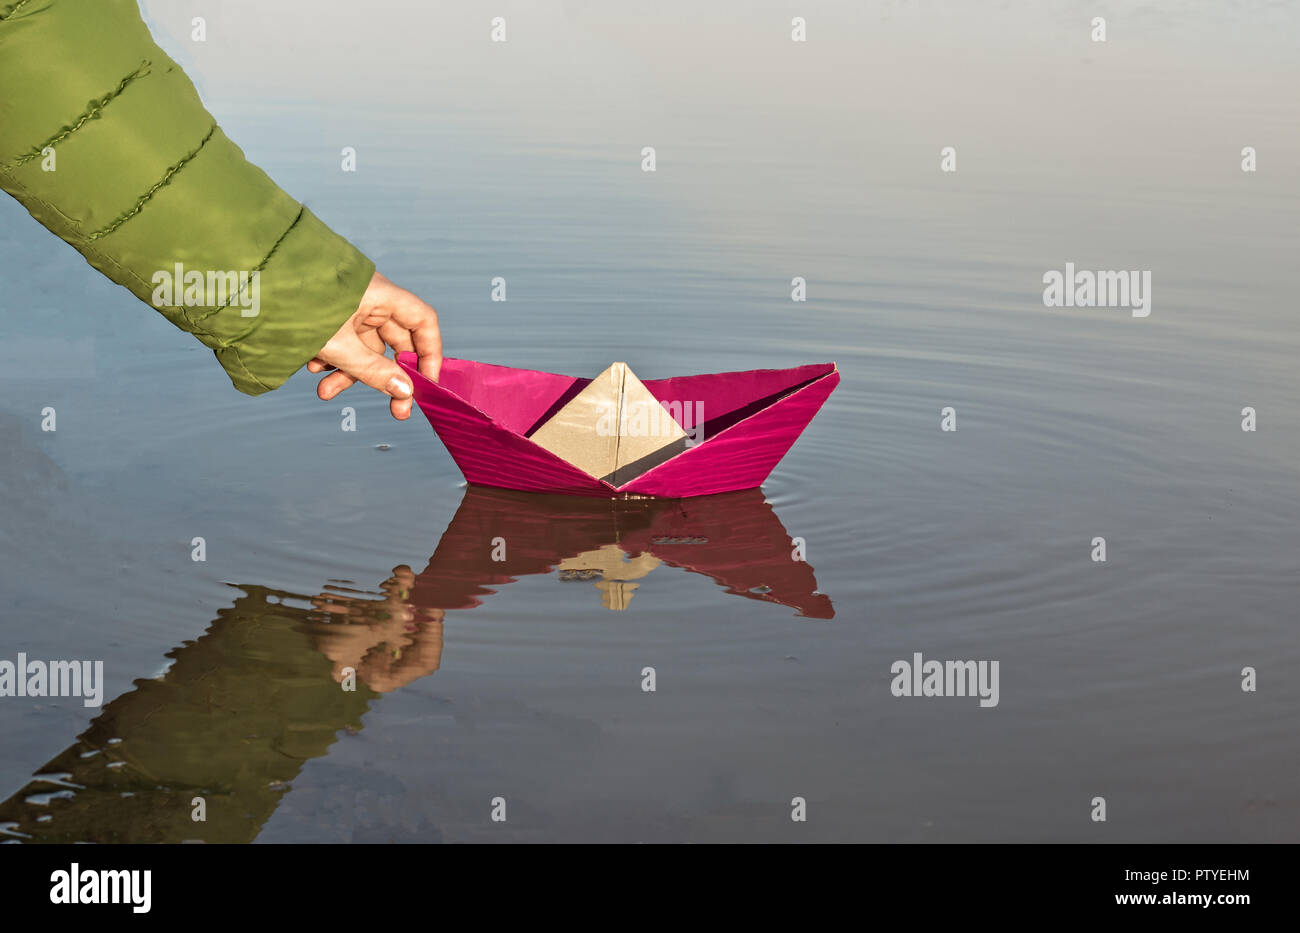 The girl is launching a red paper boat, close-up Stock Photo